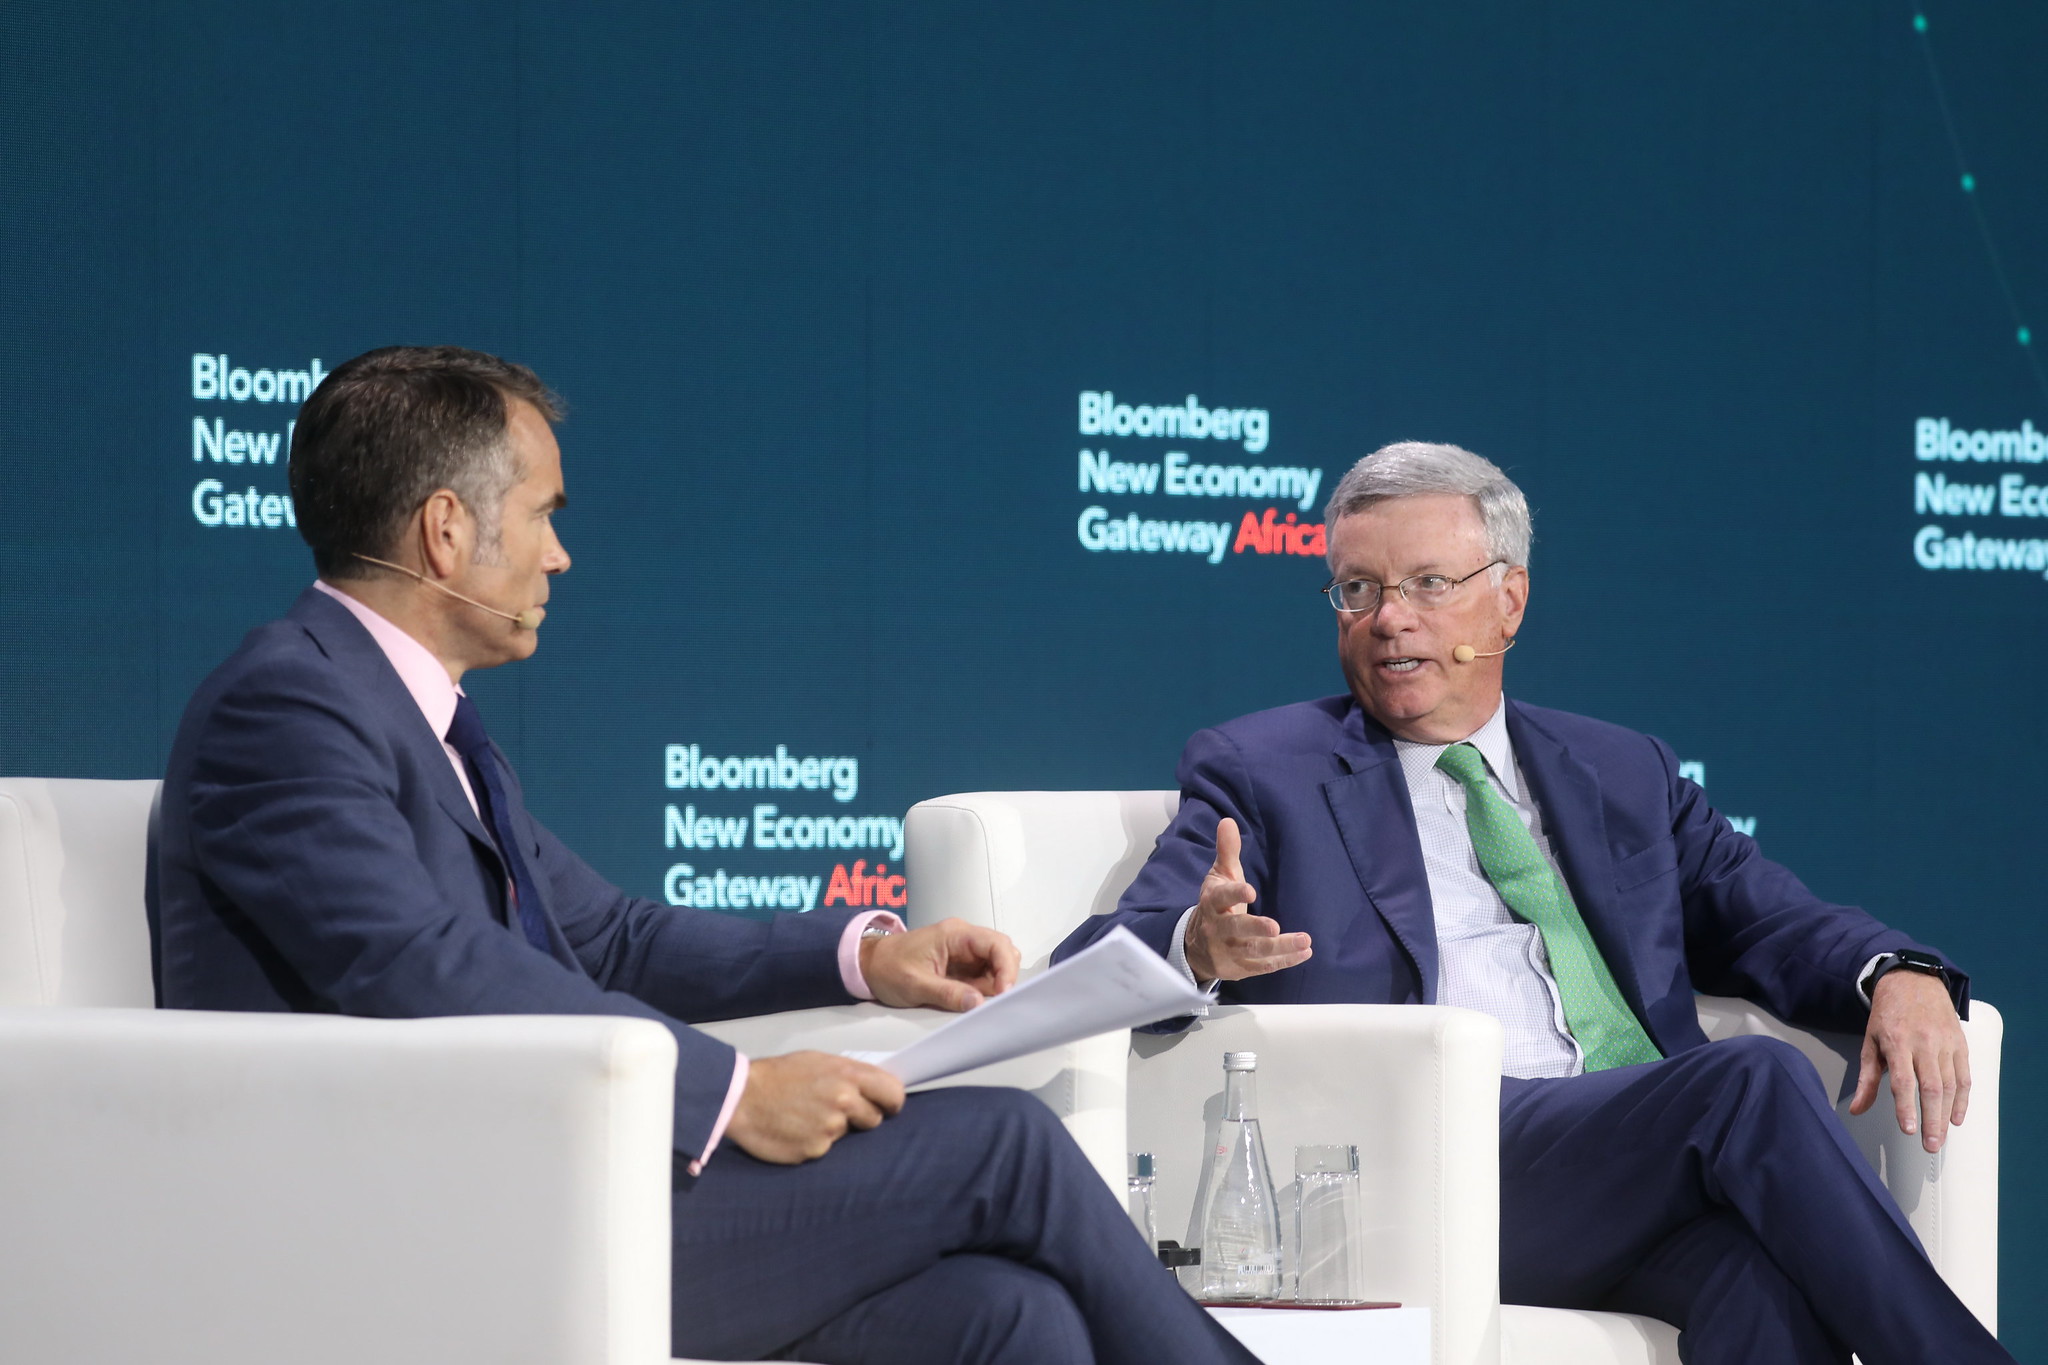 Visa Executive Chairman Alfred F. Kelly Jr. (right) speaking at the Bloomberg New Economy Gateway Africa conference in Marrakech, Morocco